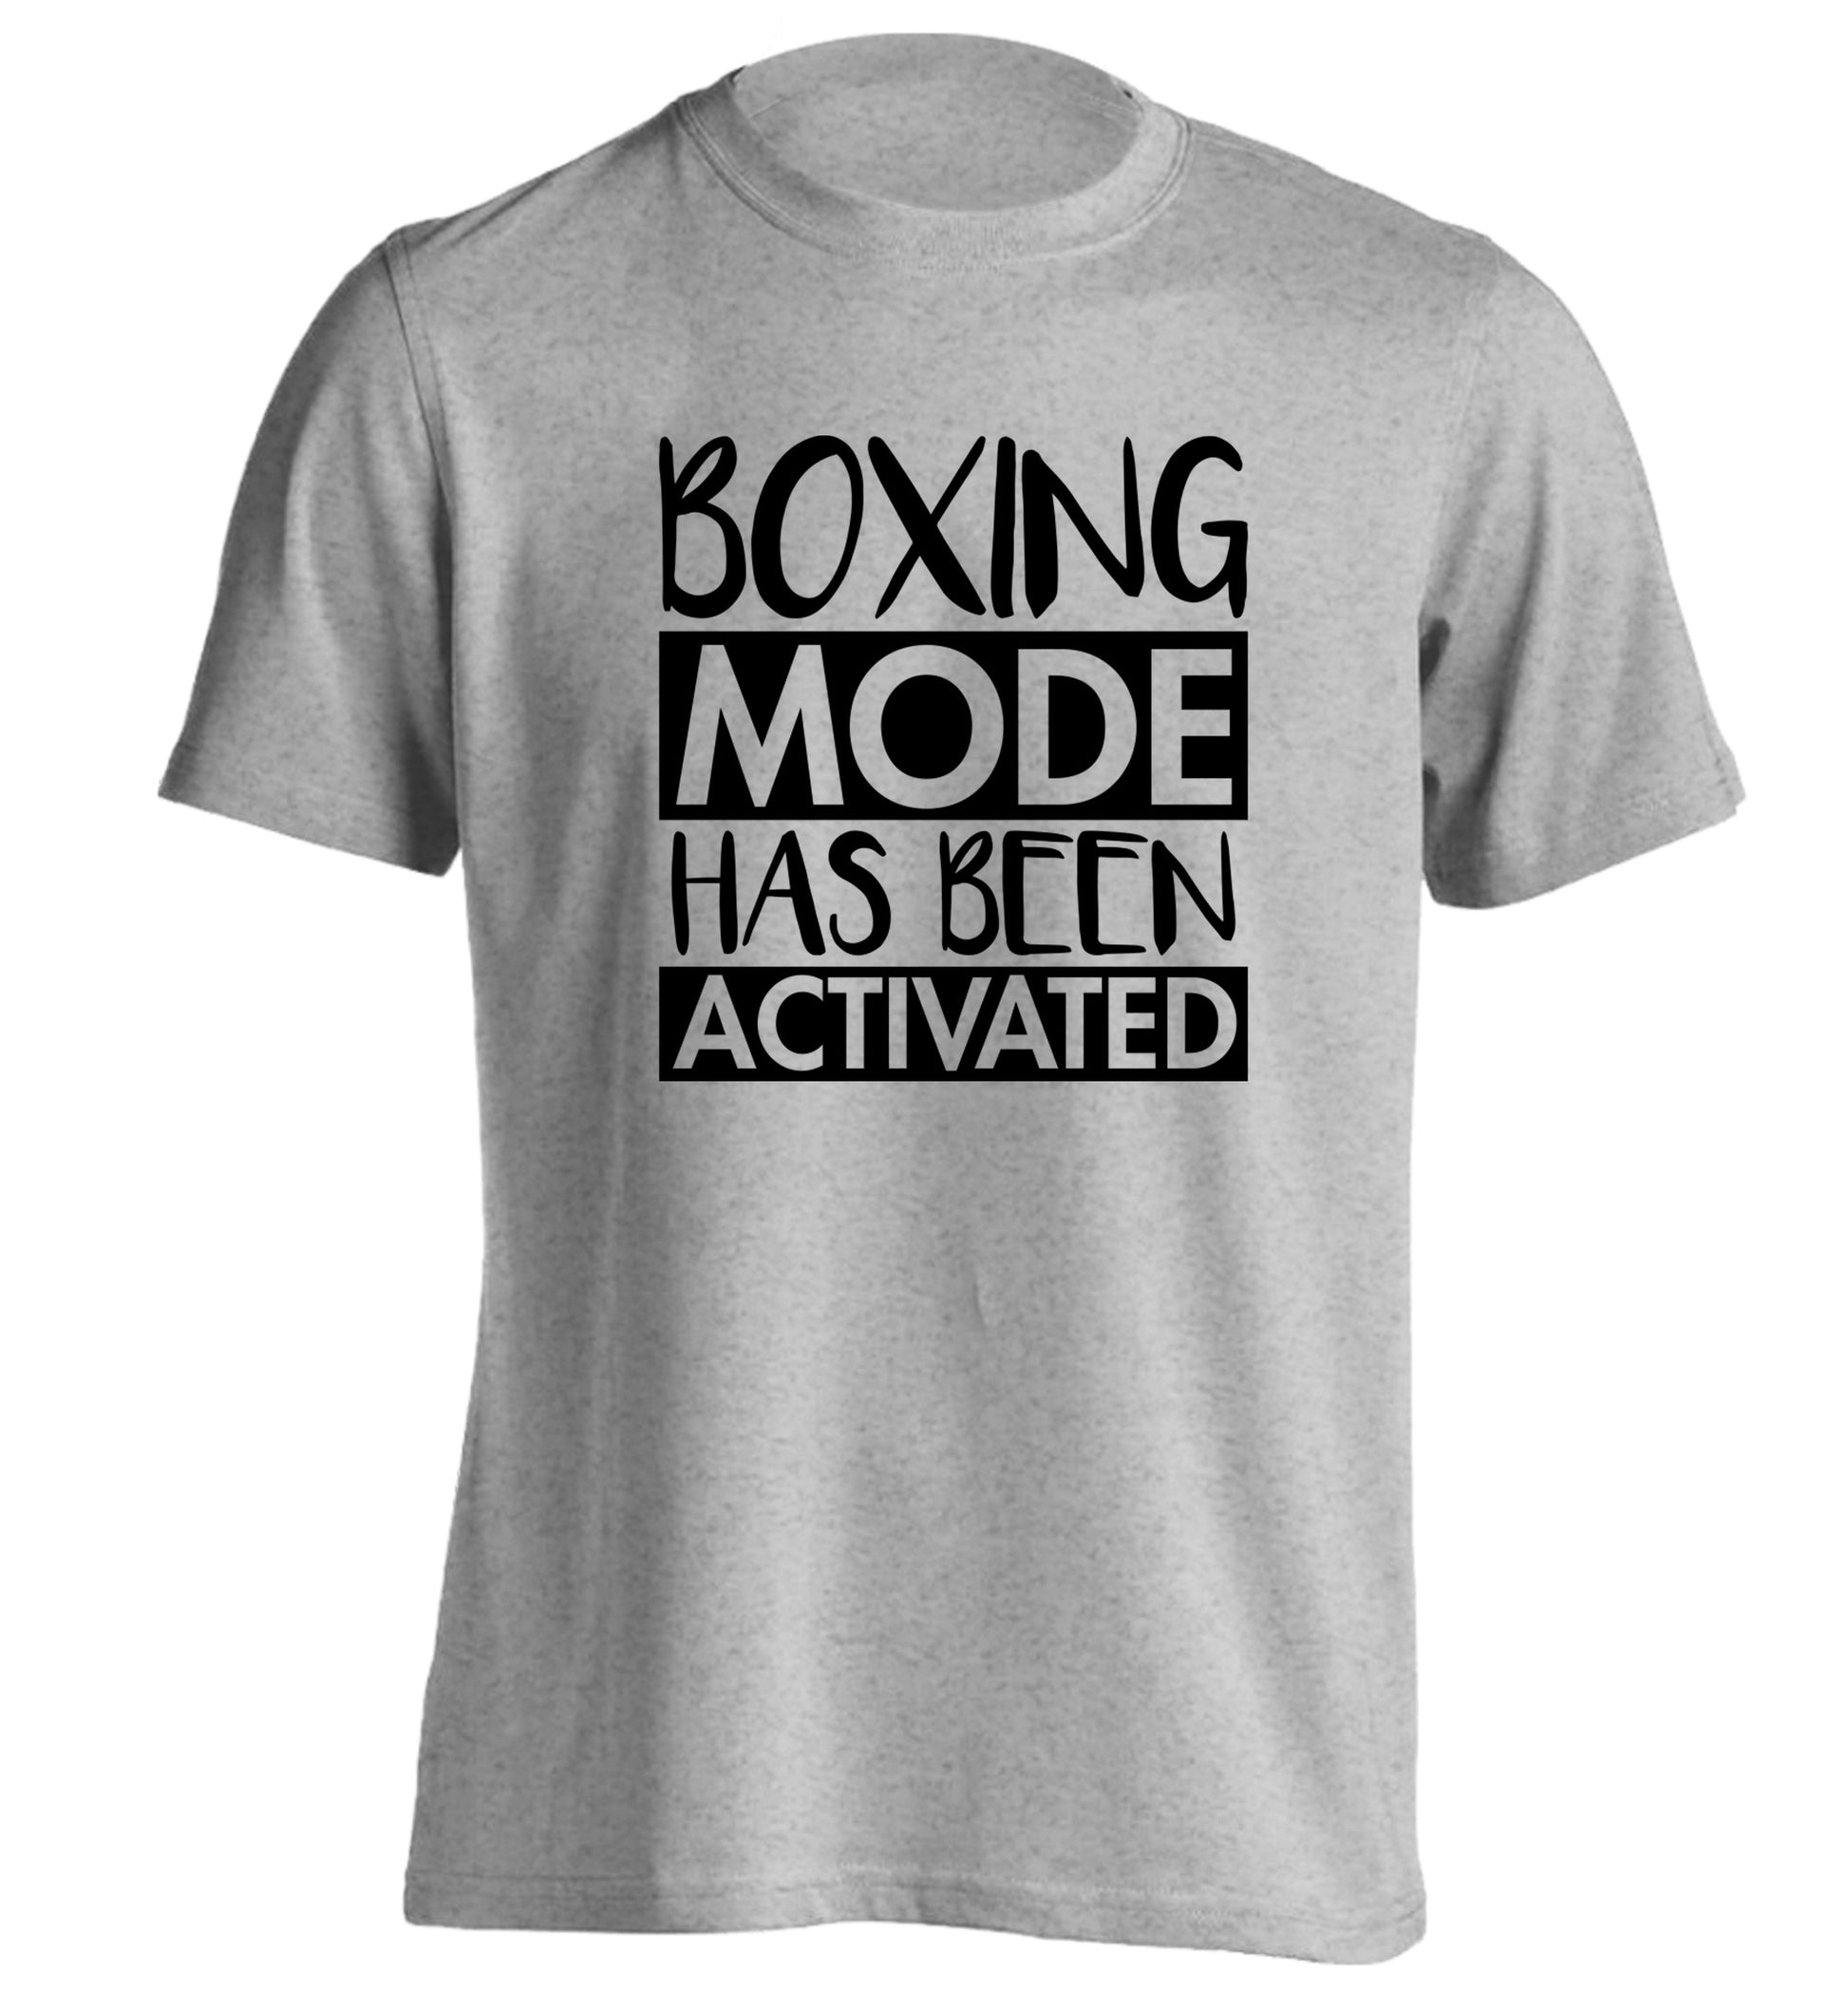 Boxing mode activated adults unisex grey Tshirt 2XL